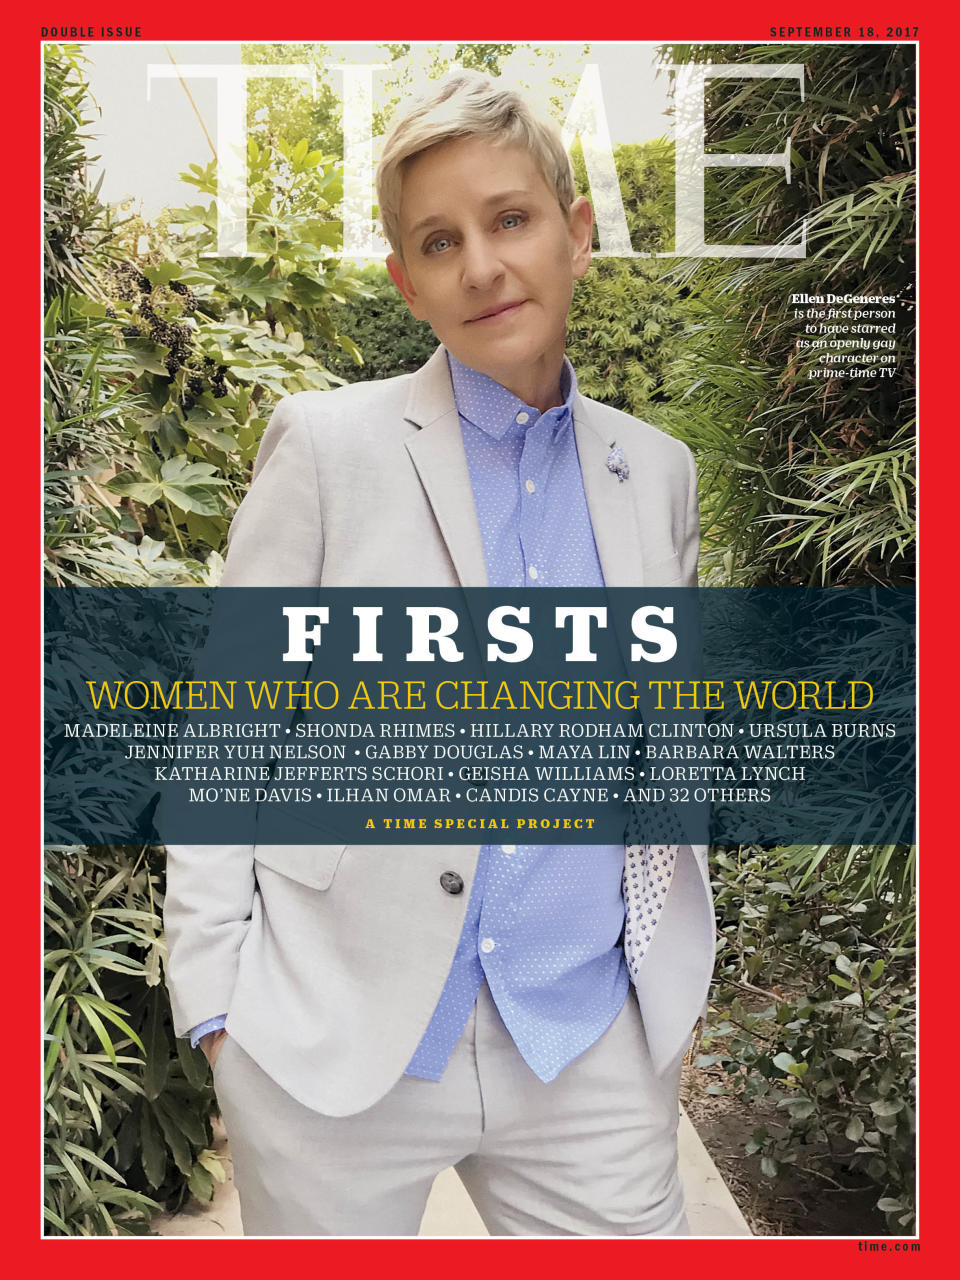 DeGeneres made history as the first person to star as an openly gay character on primetime TV.&nbsp;